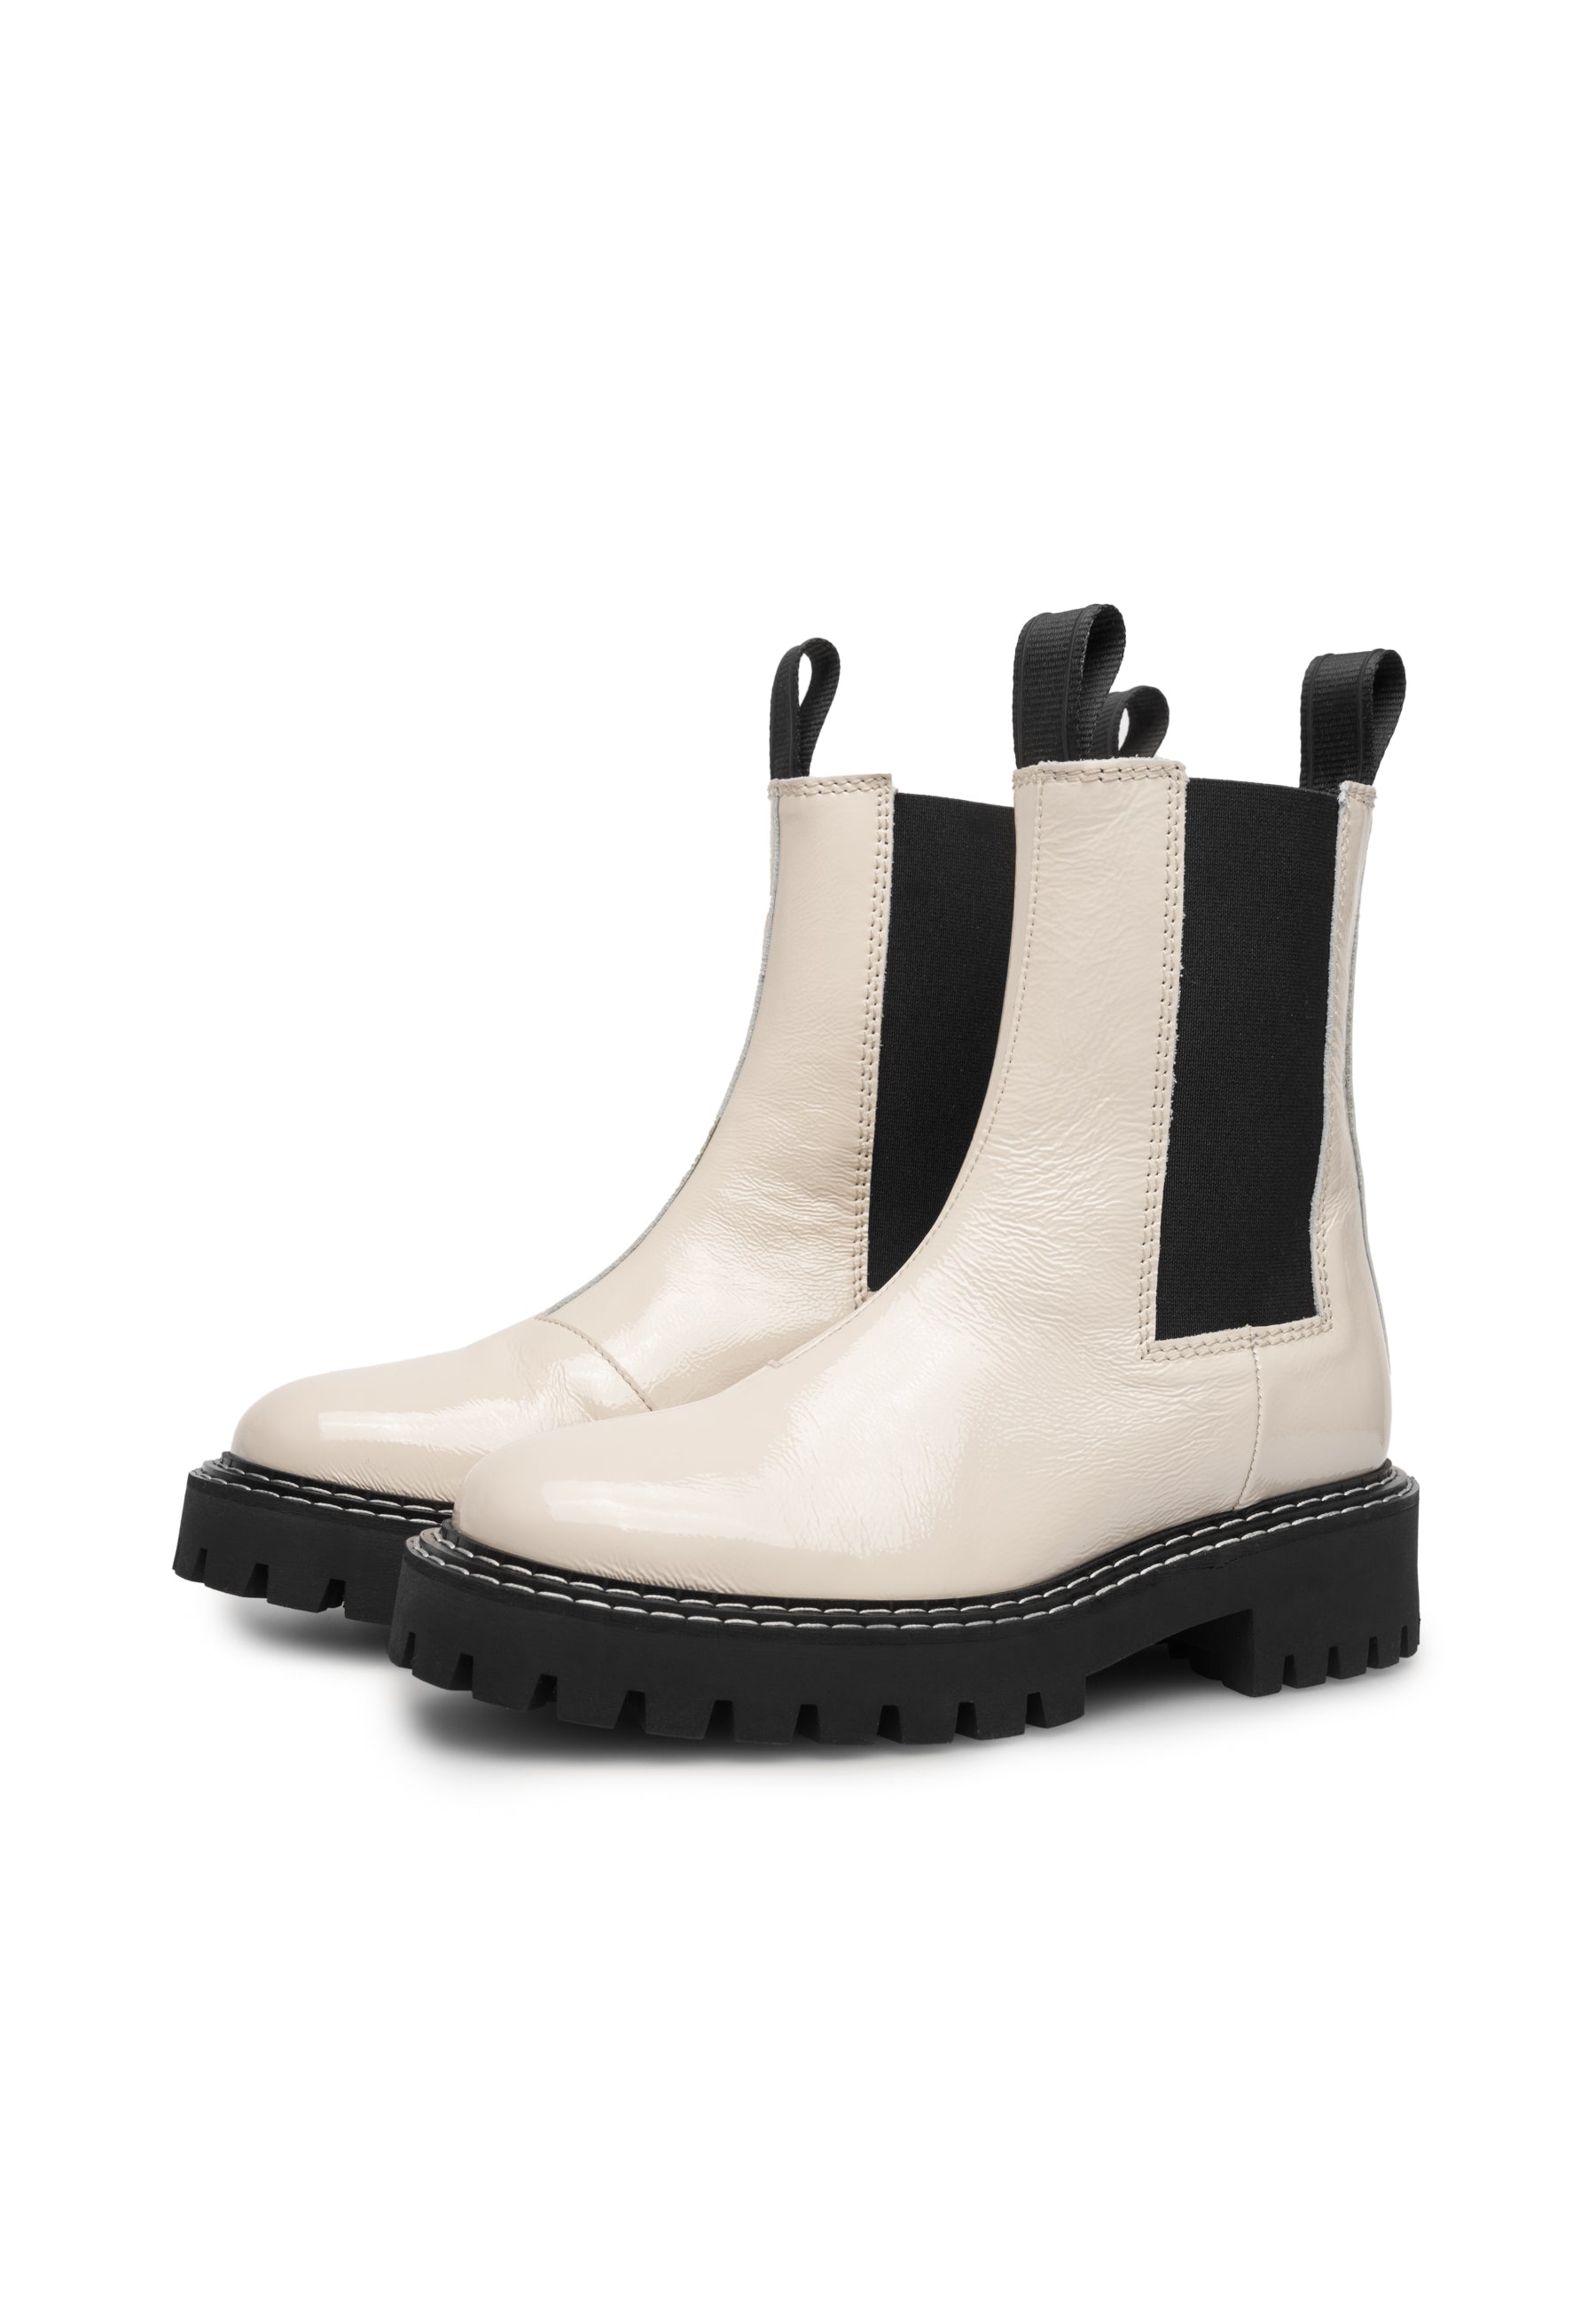 Daze Off White Patent Leather Chelsea Boots LAST1678 - 2а